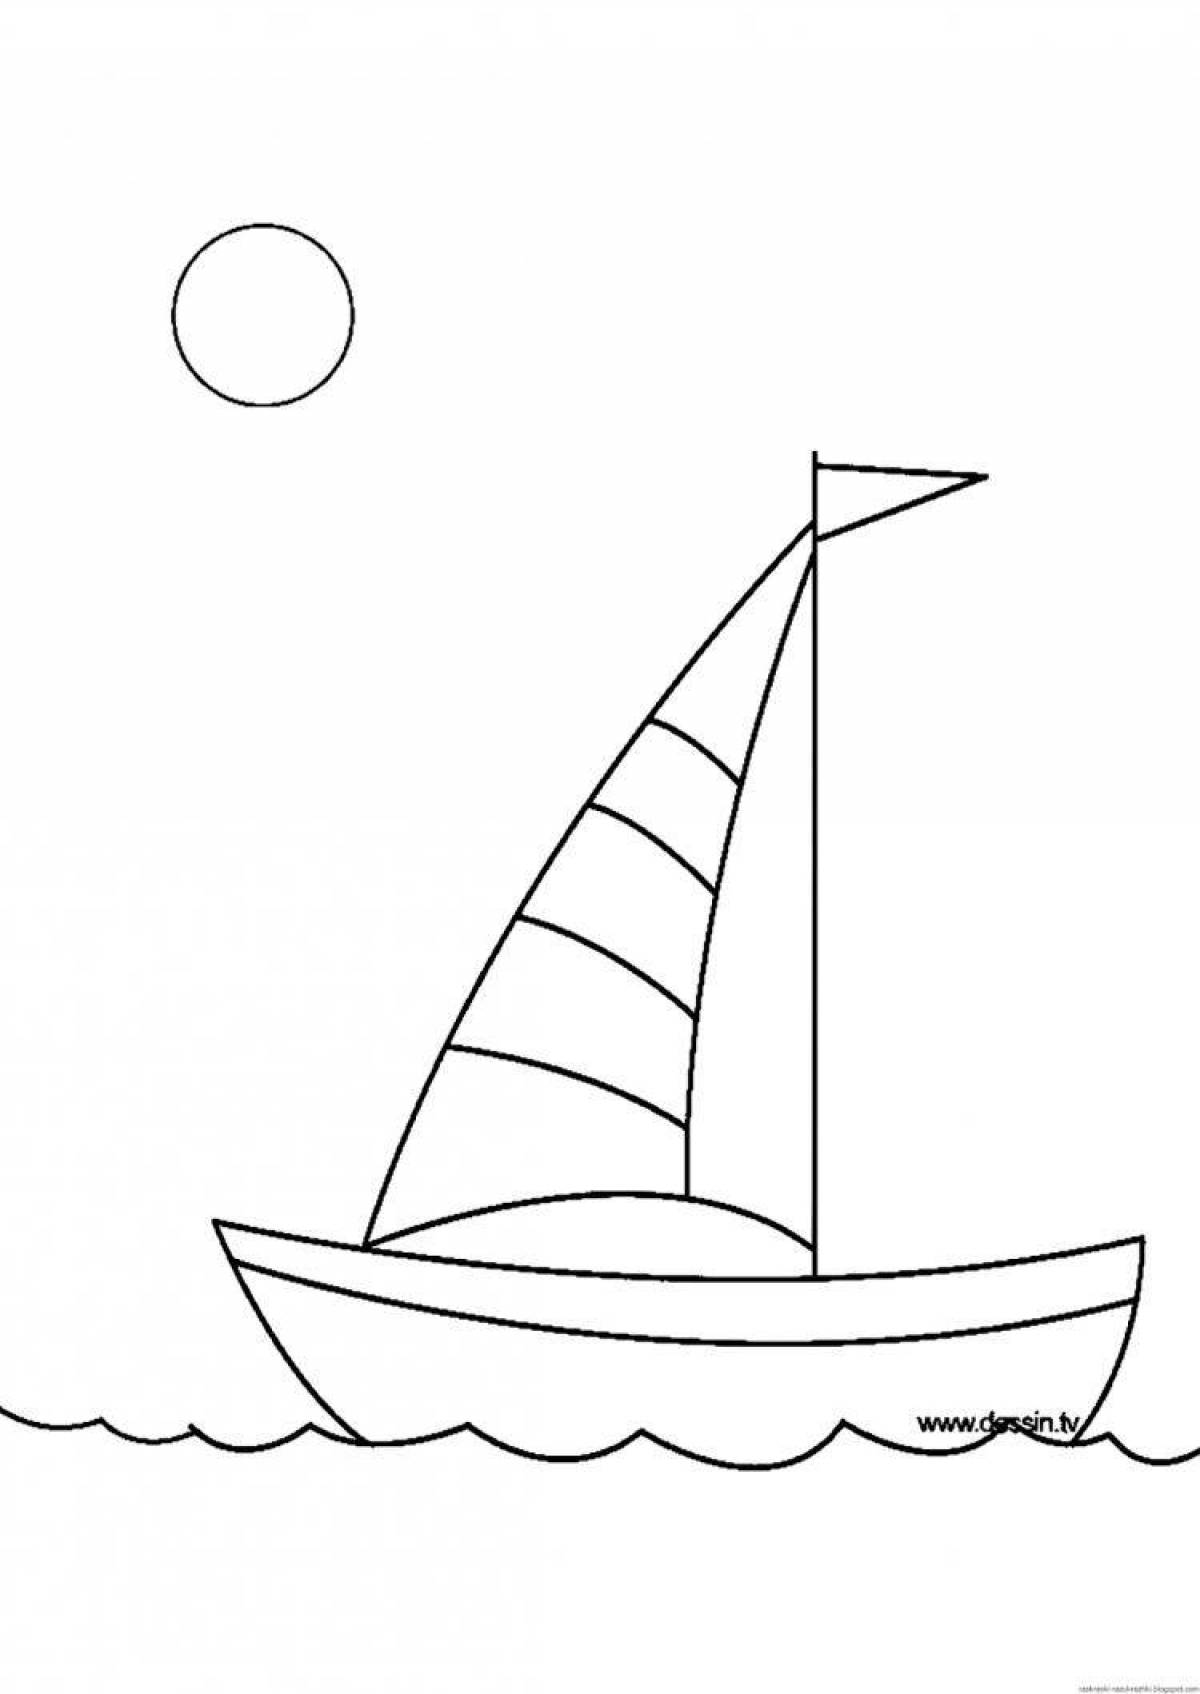 Coloring page unusual yacht